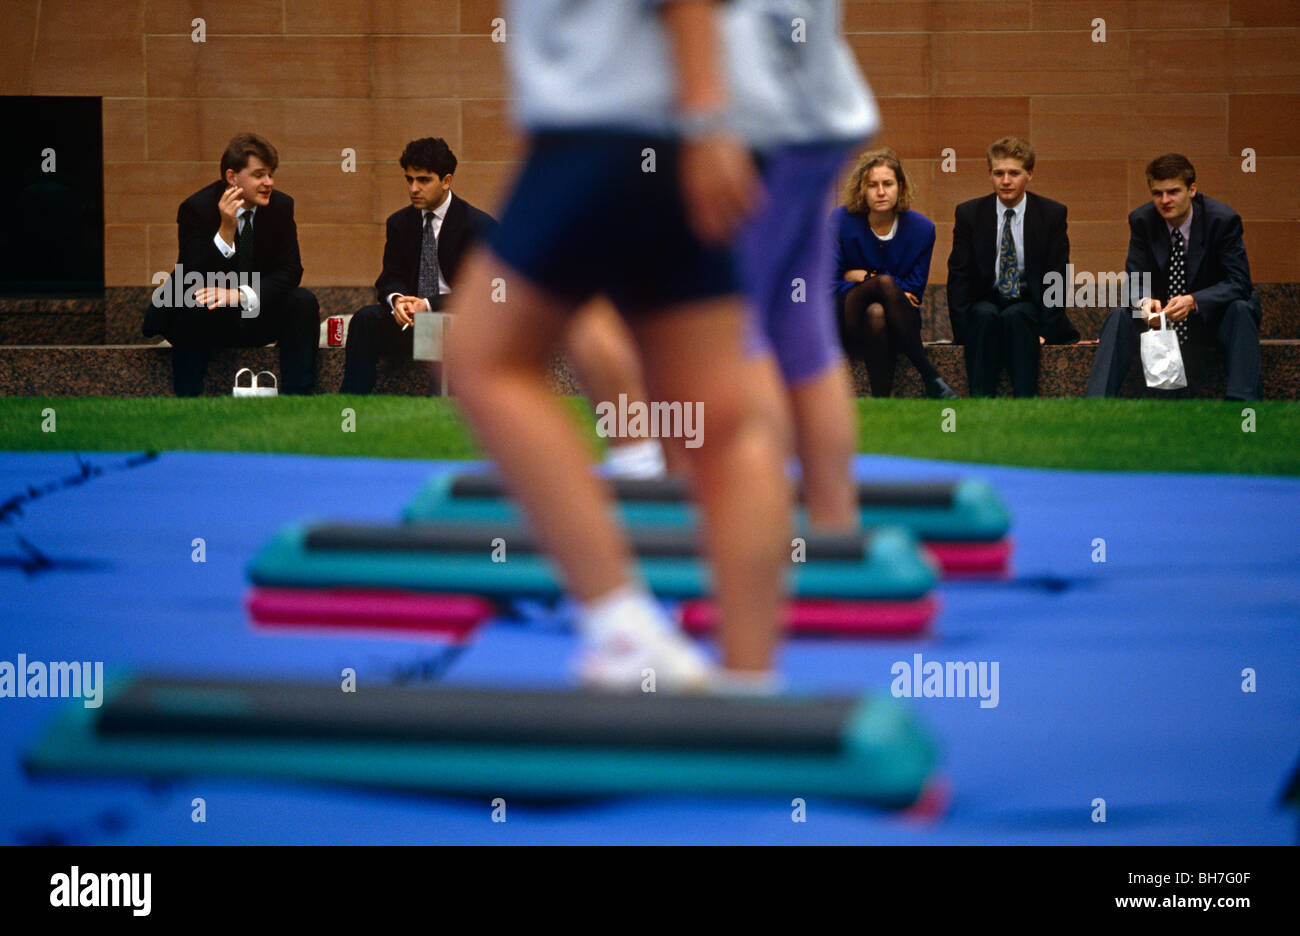 Guilty-looking office workers watch a group of fitness fanatics demonstrate exercises during a lunchtime promotion in Broadgate Stock Photo